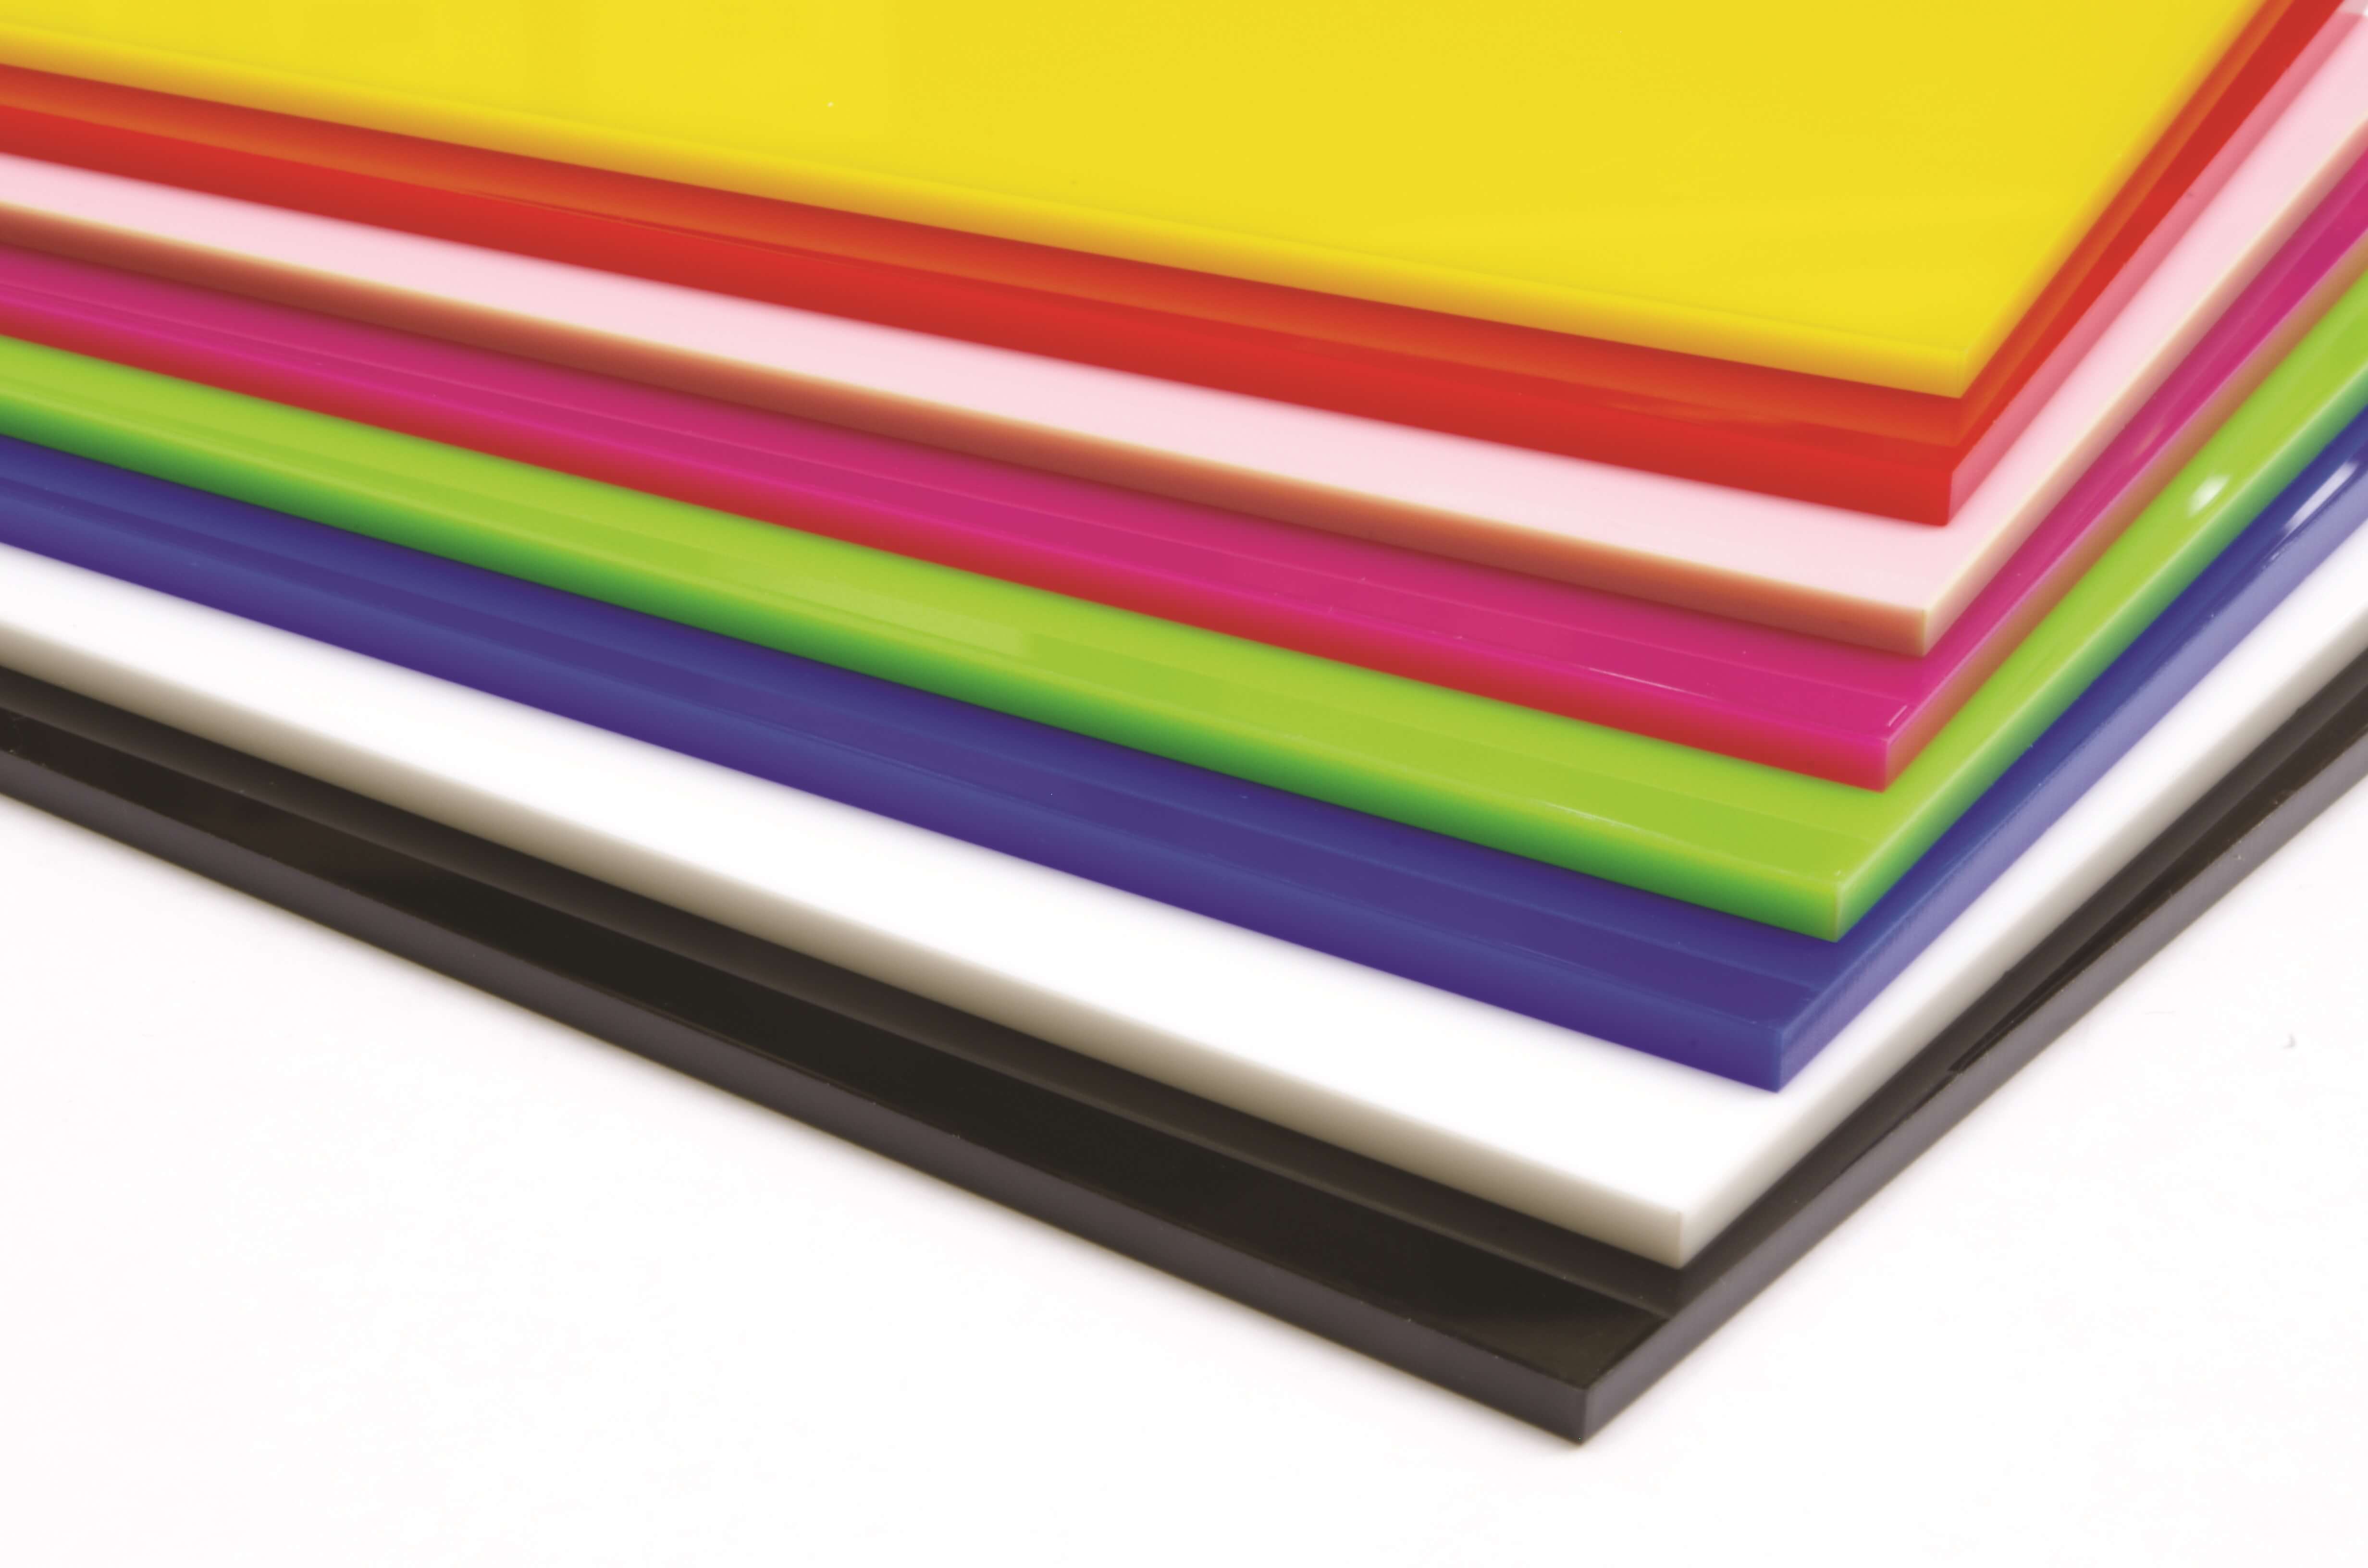 Cast Acrylic 3mm Sheets 1000 X 500mm Assorted Pack Of 8 Assorted